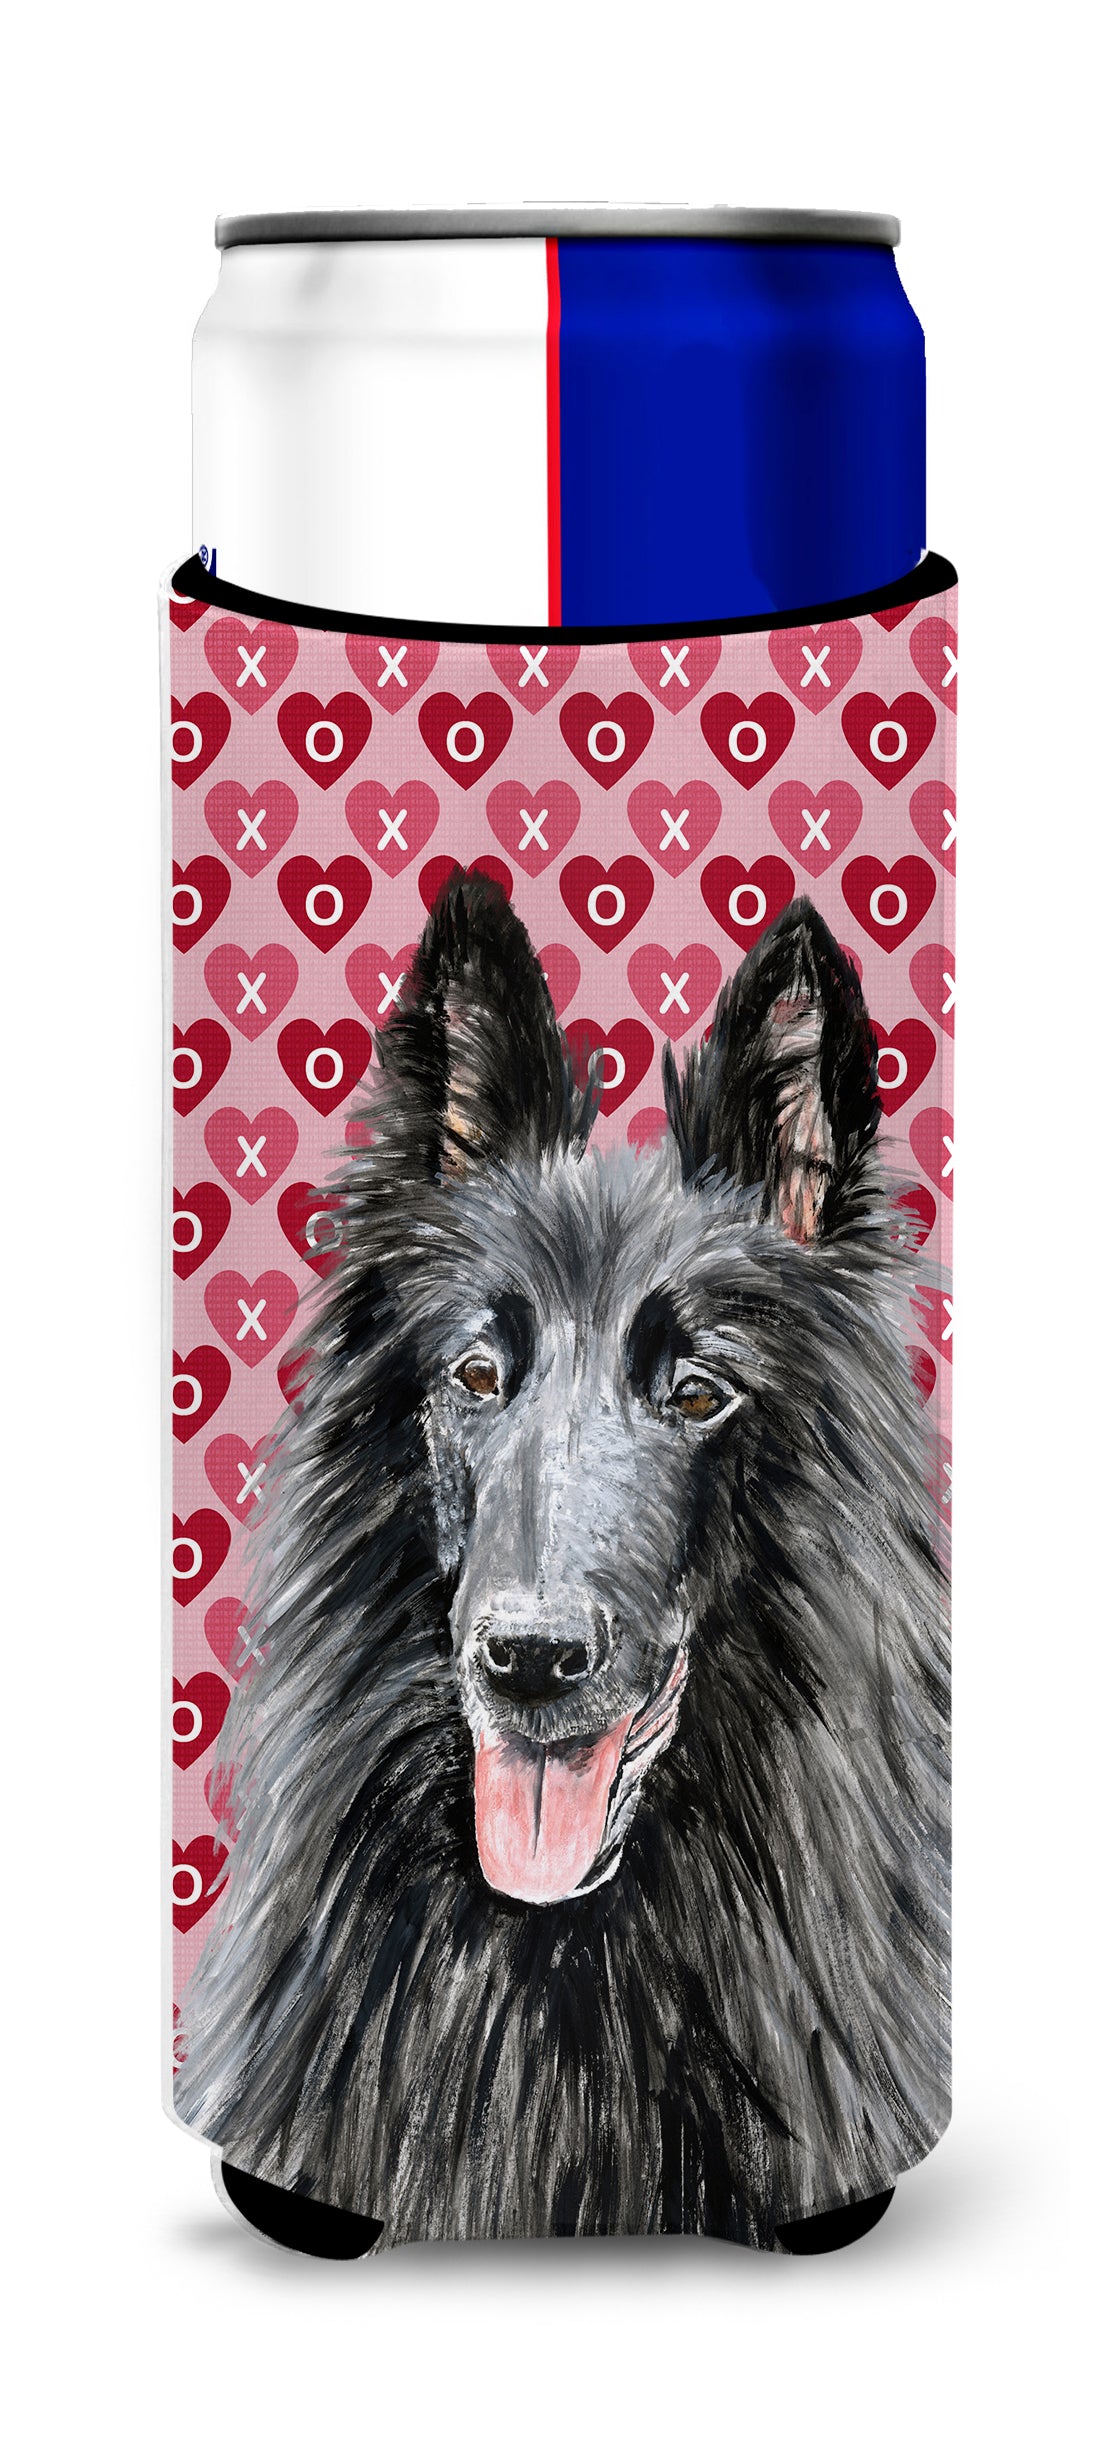 Belgian Sheepdog Hearts Love and Valentine's Day Portrait Ultra Beverage Insulators for slim cans SC9241MUK